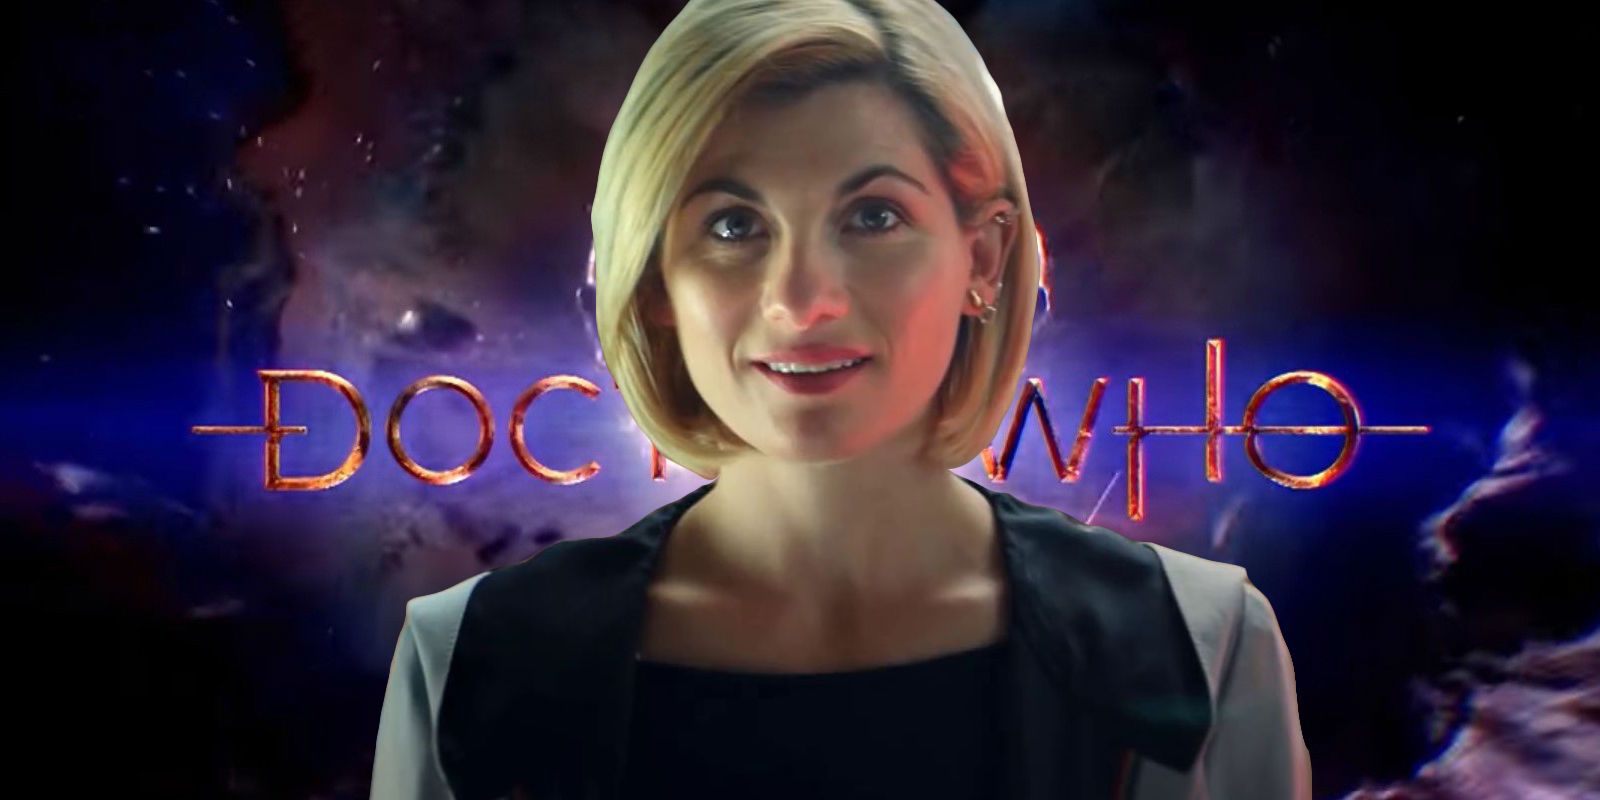 Jodie Whittaker as Thirteenth Doctor in Doctor Who